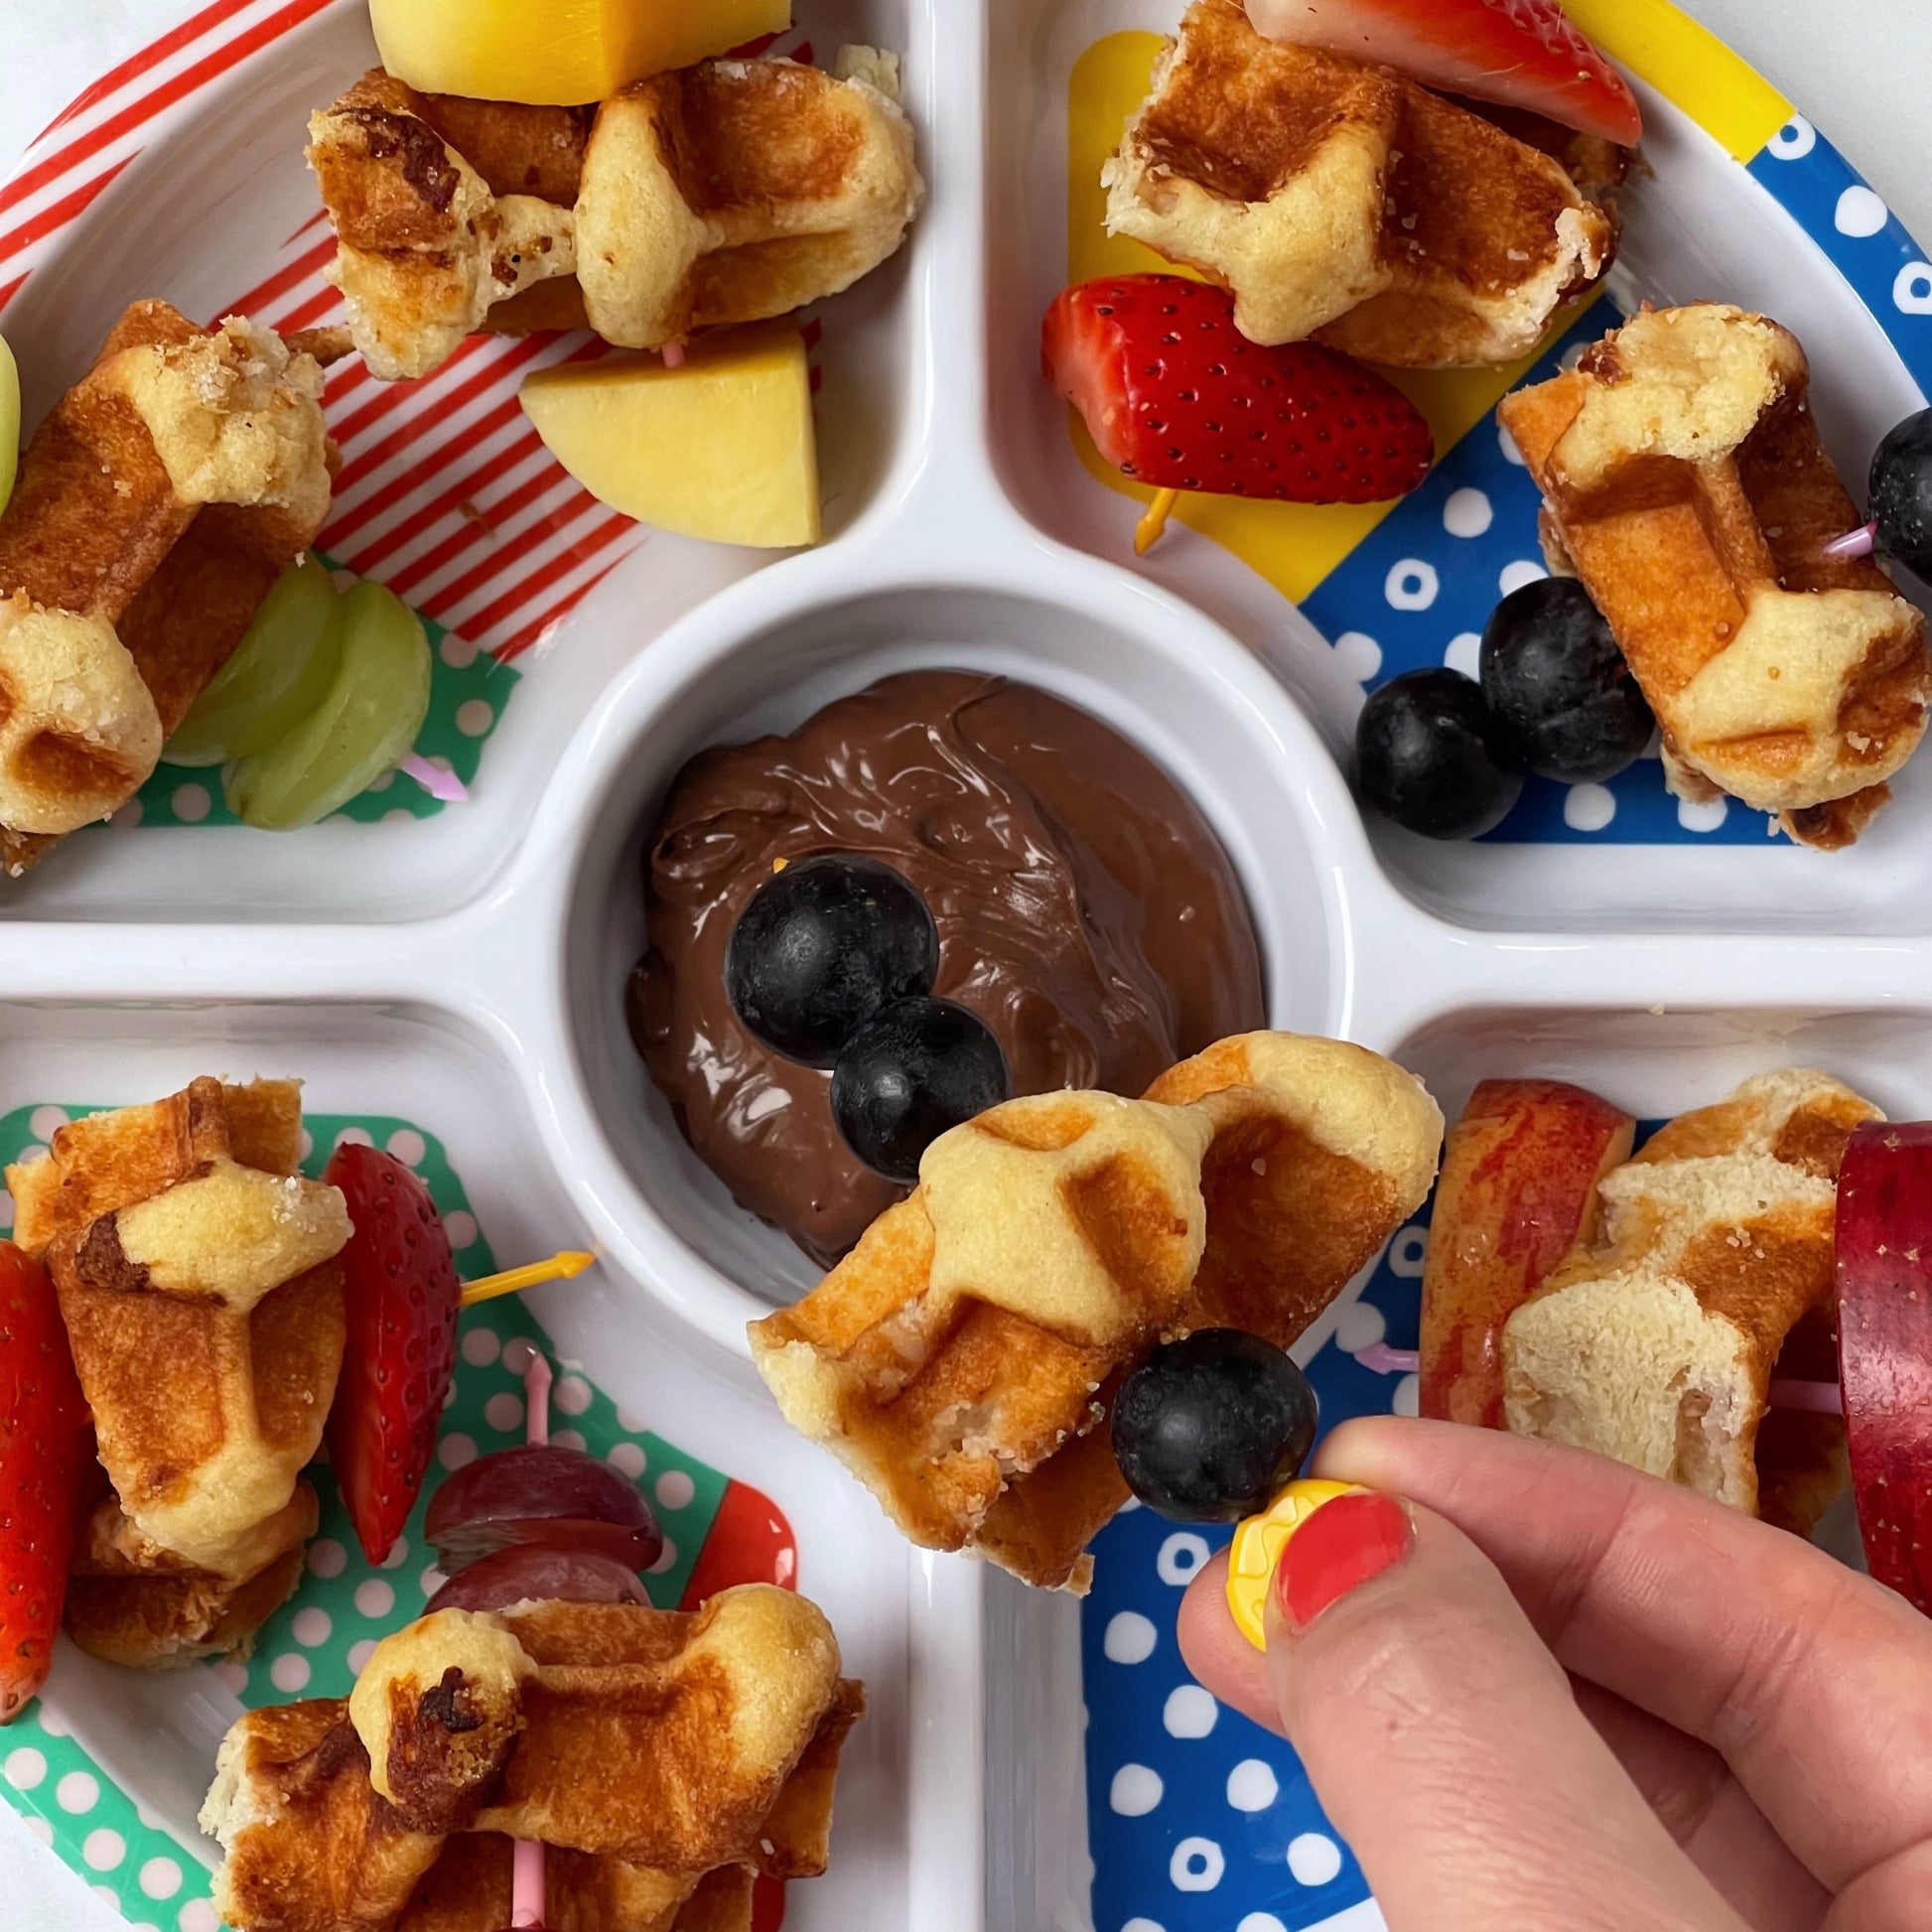 Pick Stick Pastels bring used for waffles and fresh fruit in a children's divided plate with chocolate sauce.